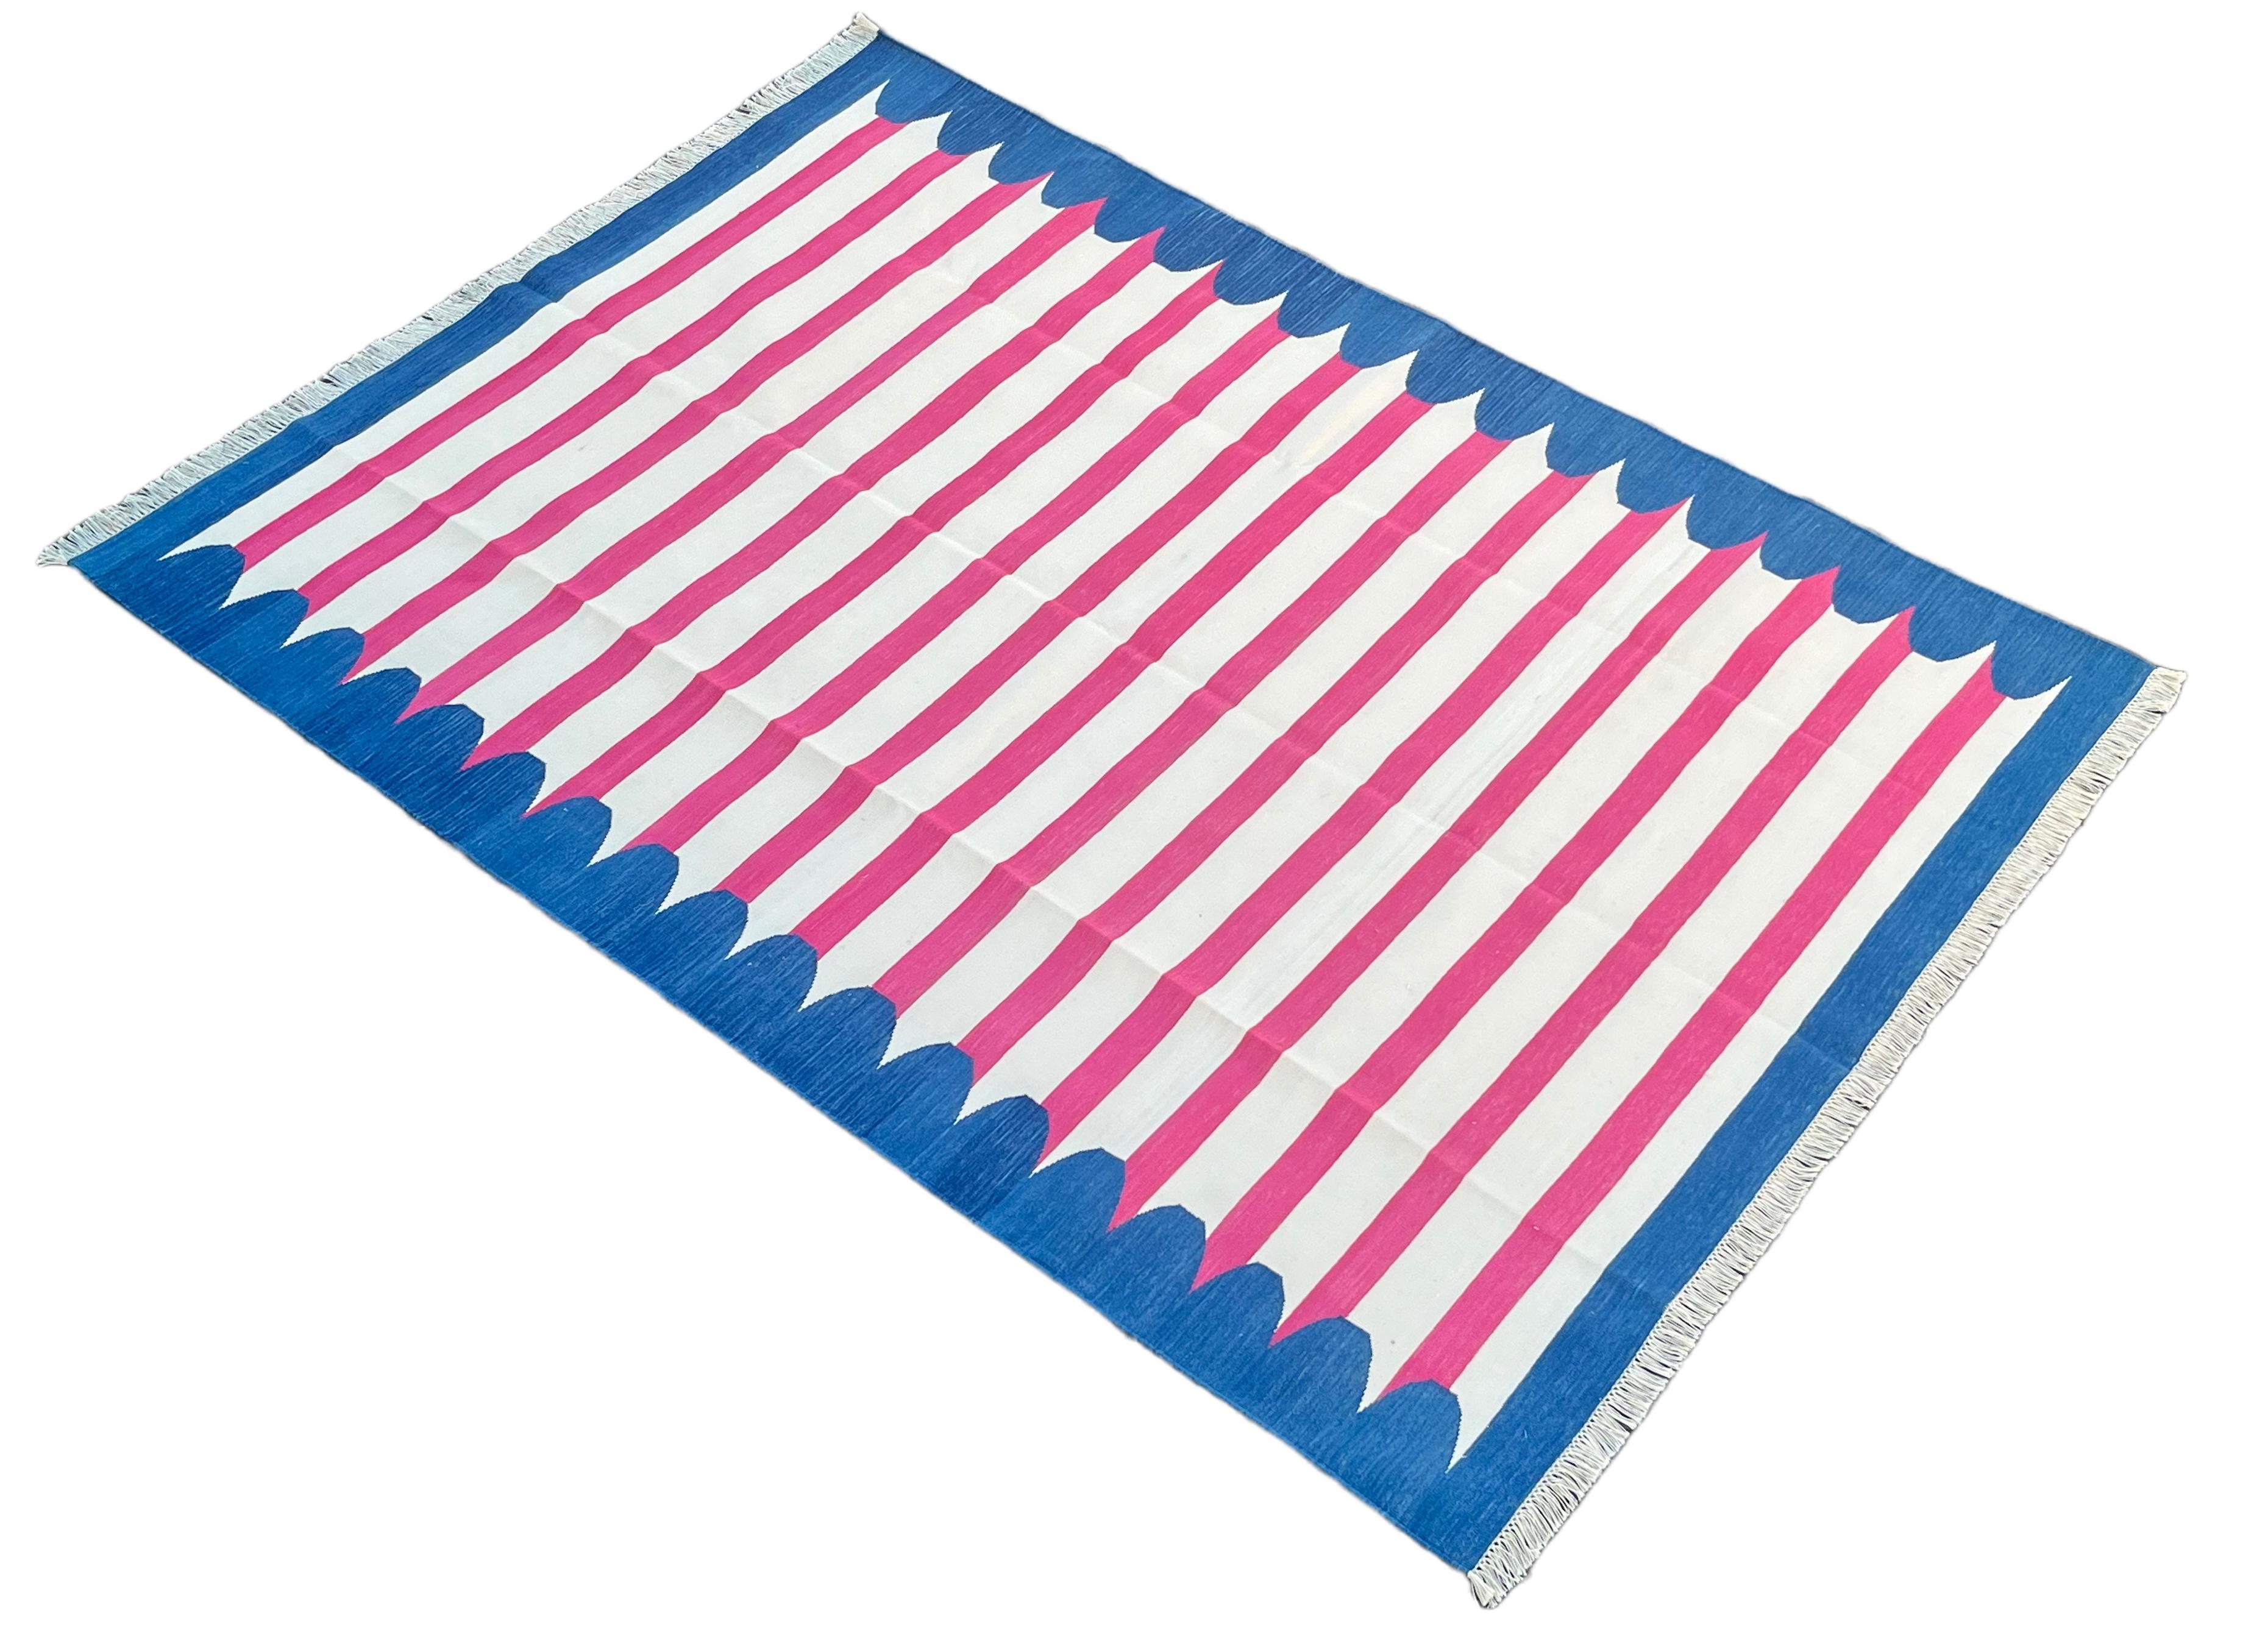 Cotton Vegetable Dyed Blue And Pink Scalloped Striped Indian Dhurrie Rug-5'x7' 
These special flat-weave dhurries are hand-woven with 15 ply 100% cotton yarn. Due to the special manufacturing techniques used to create our rugs, the size and color of